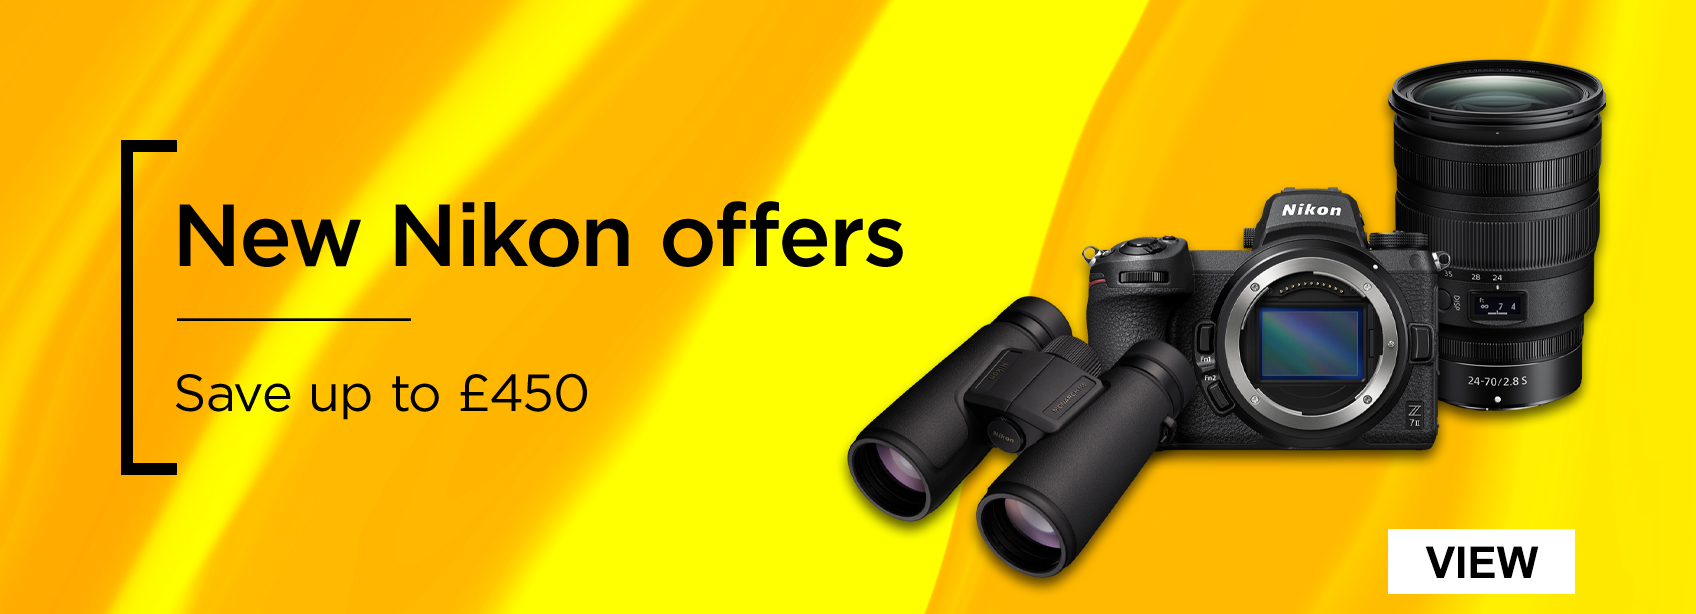 New Nikon offers. Save up to £450